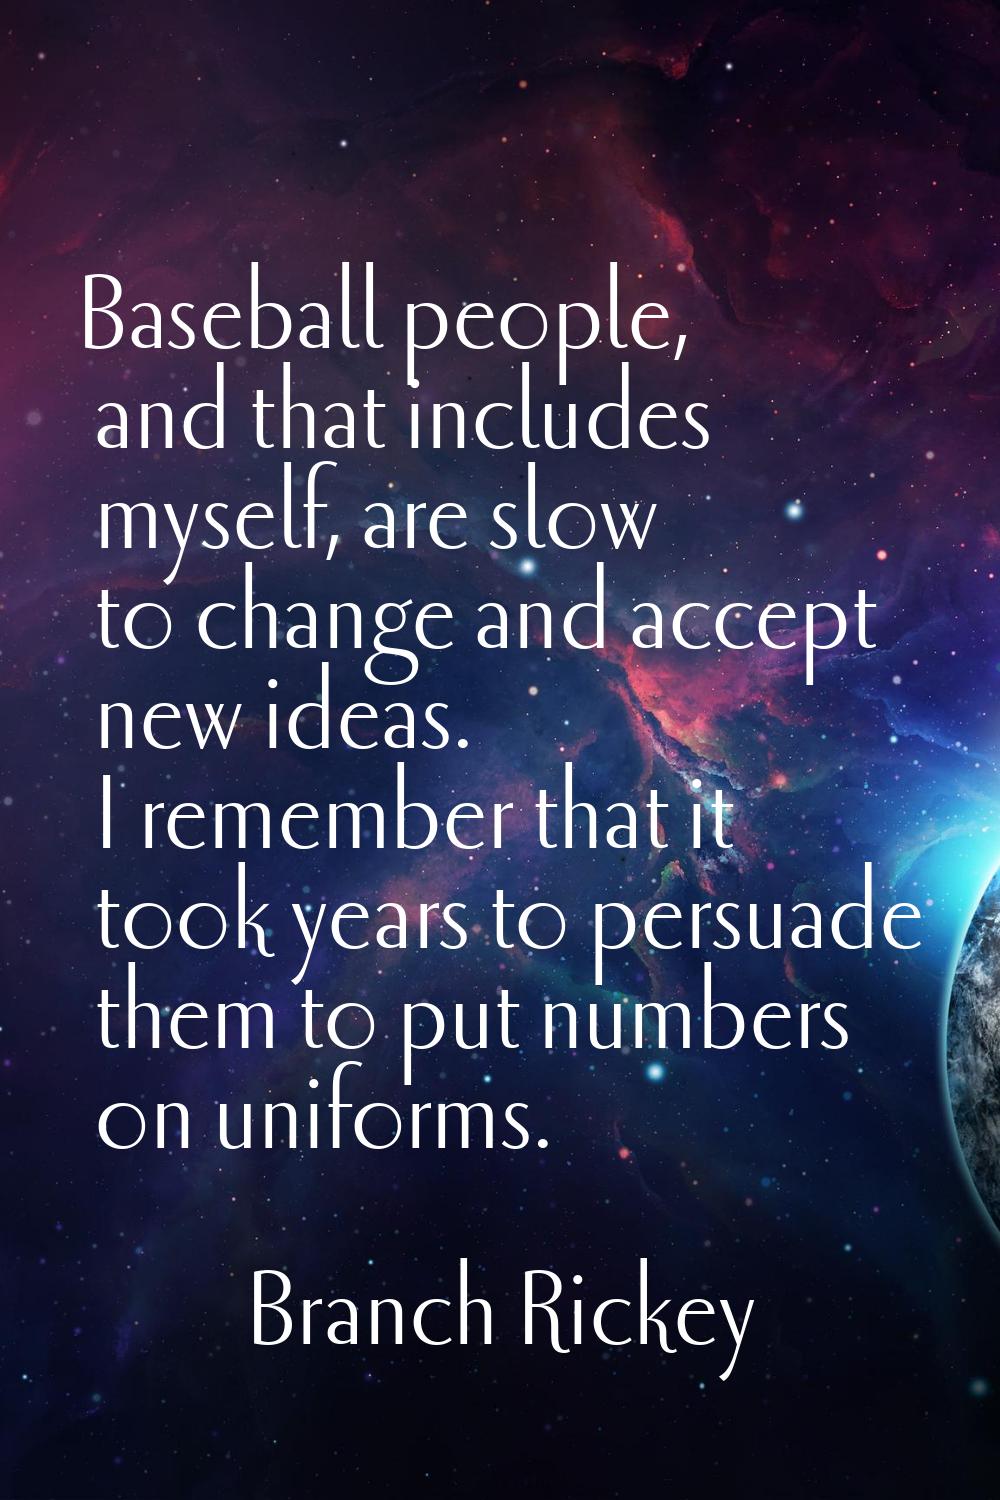 Baseball people, and that includes myself, are slow to change and accept new ideas. I remember that